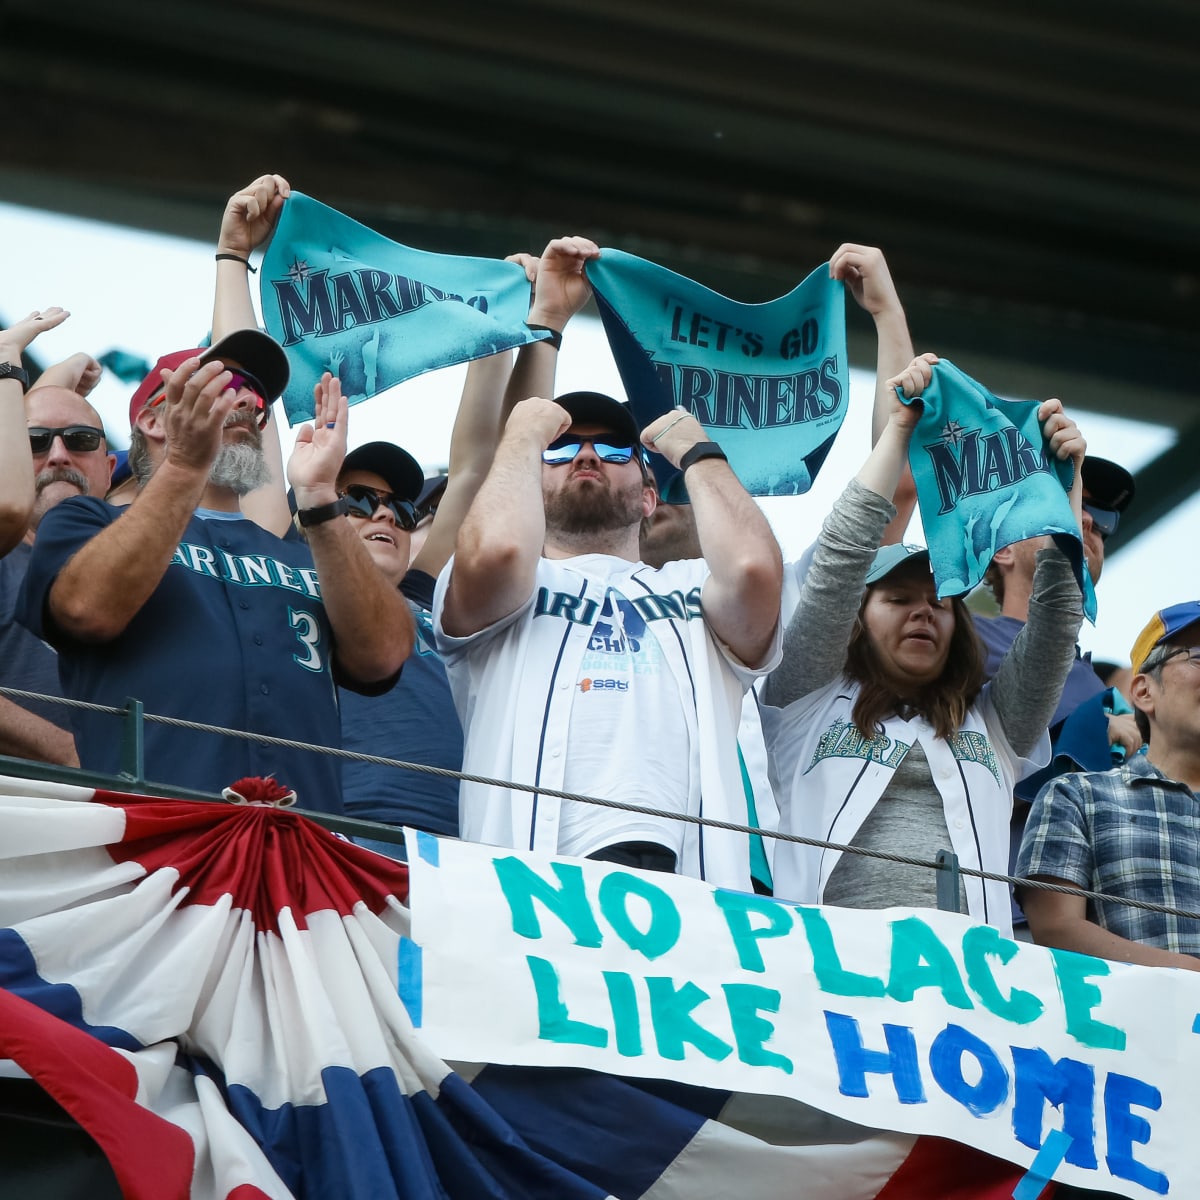 Fan shows his support for both Astros, Mariners in ALDS